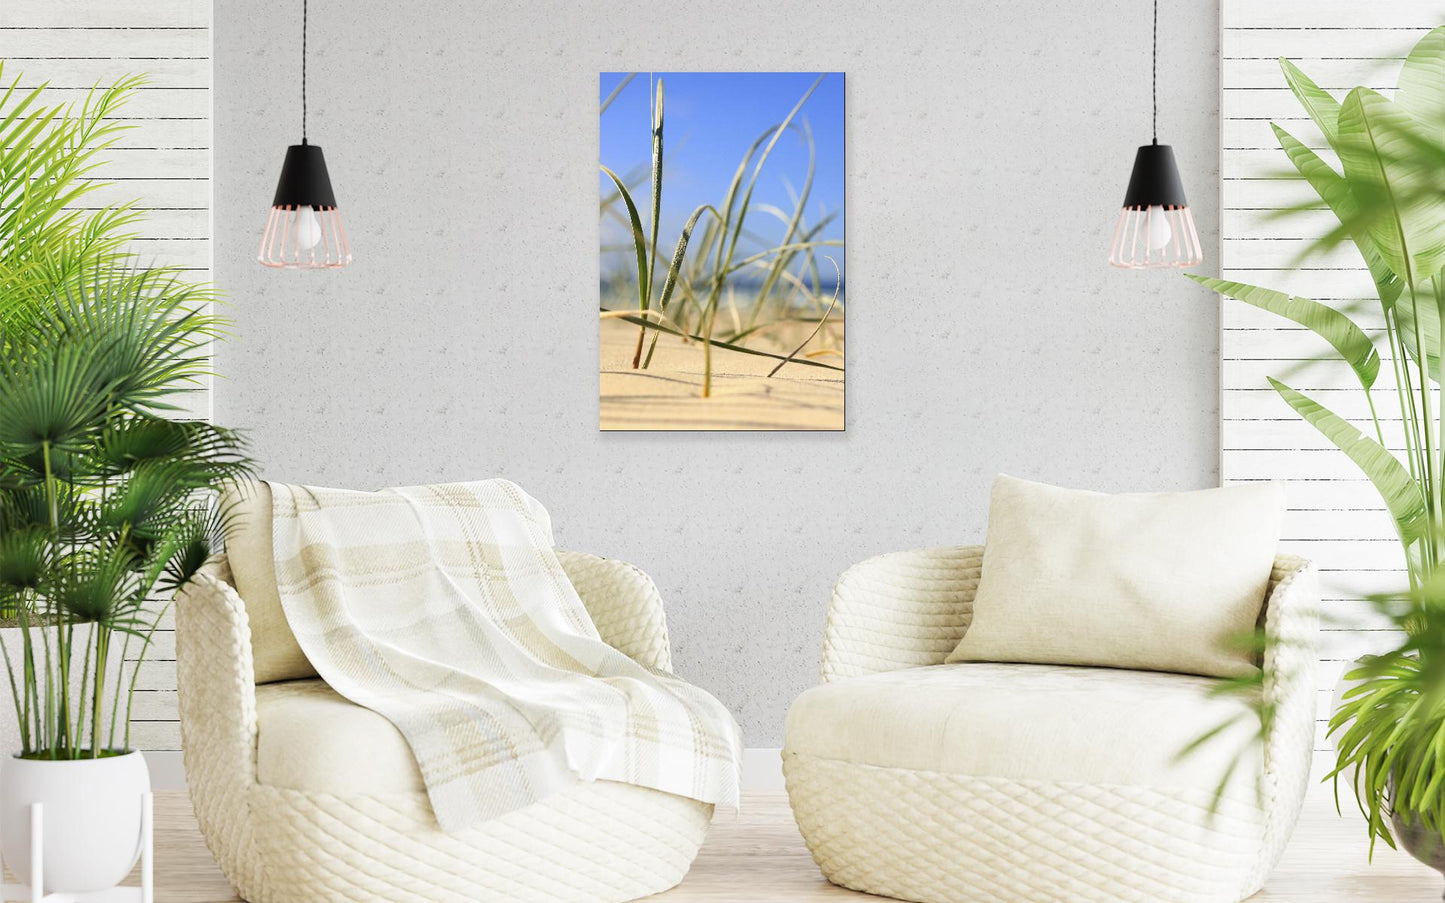 Image 9 - Seagrass-frame-5